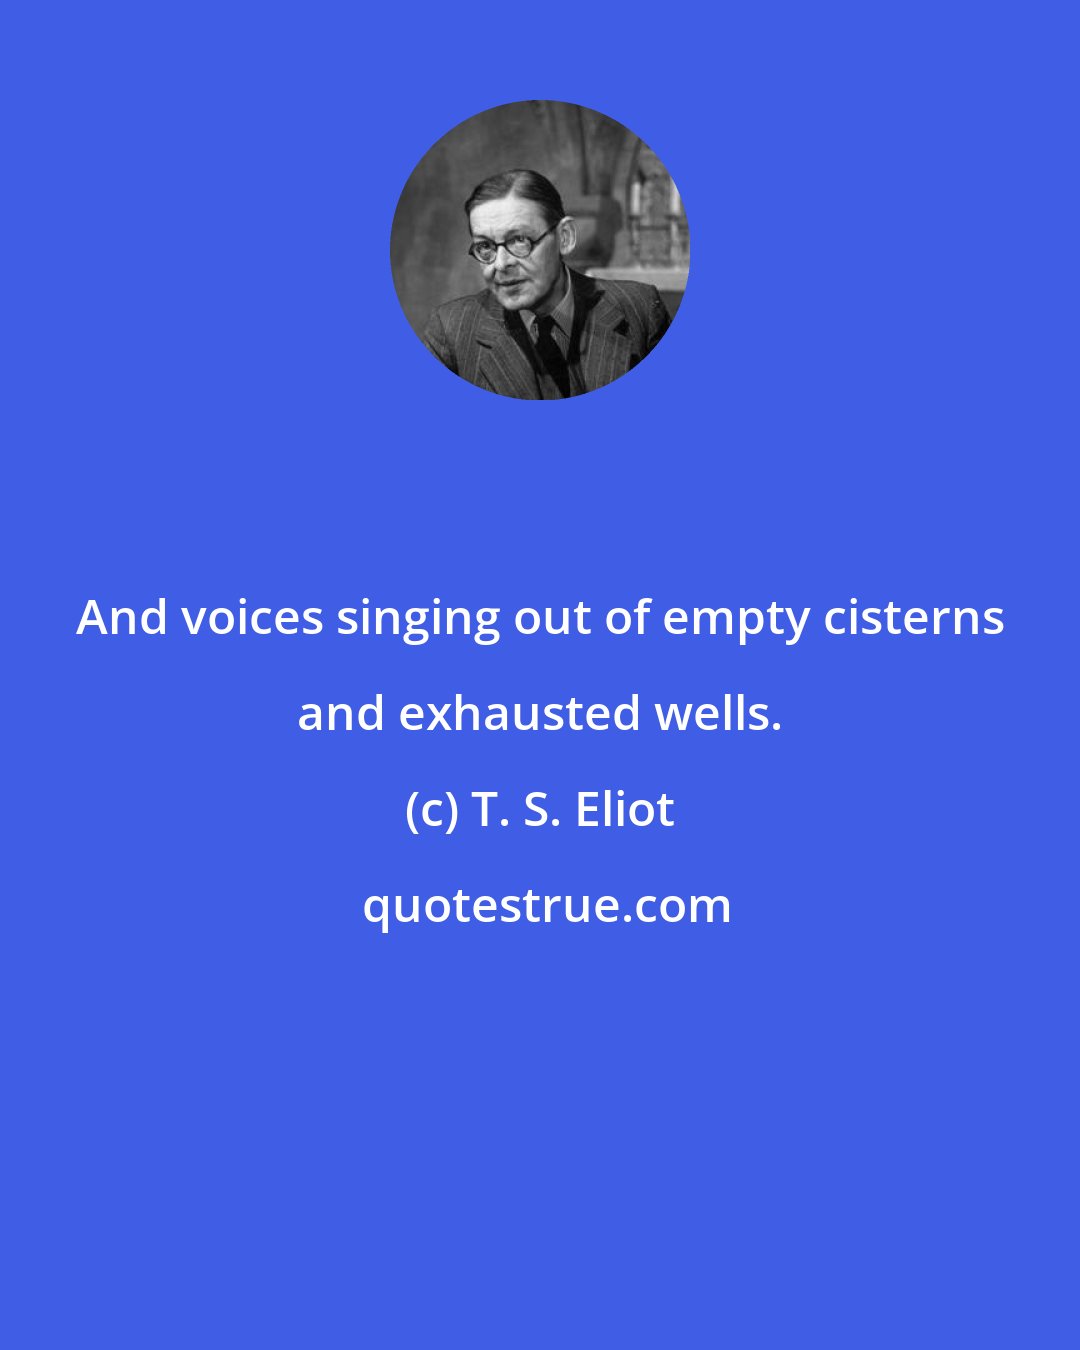 T. S. Eliot: And voices singing out of empty cisterns and exhausted wells.